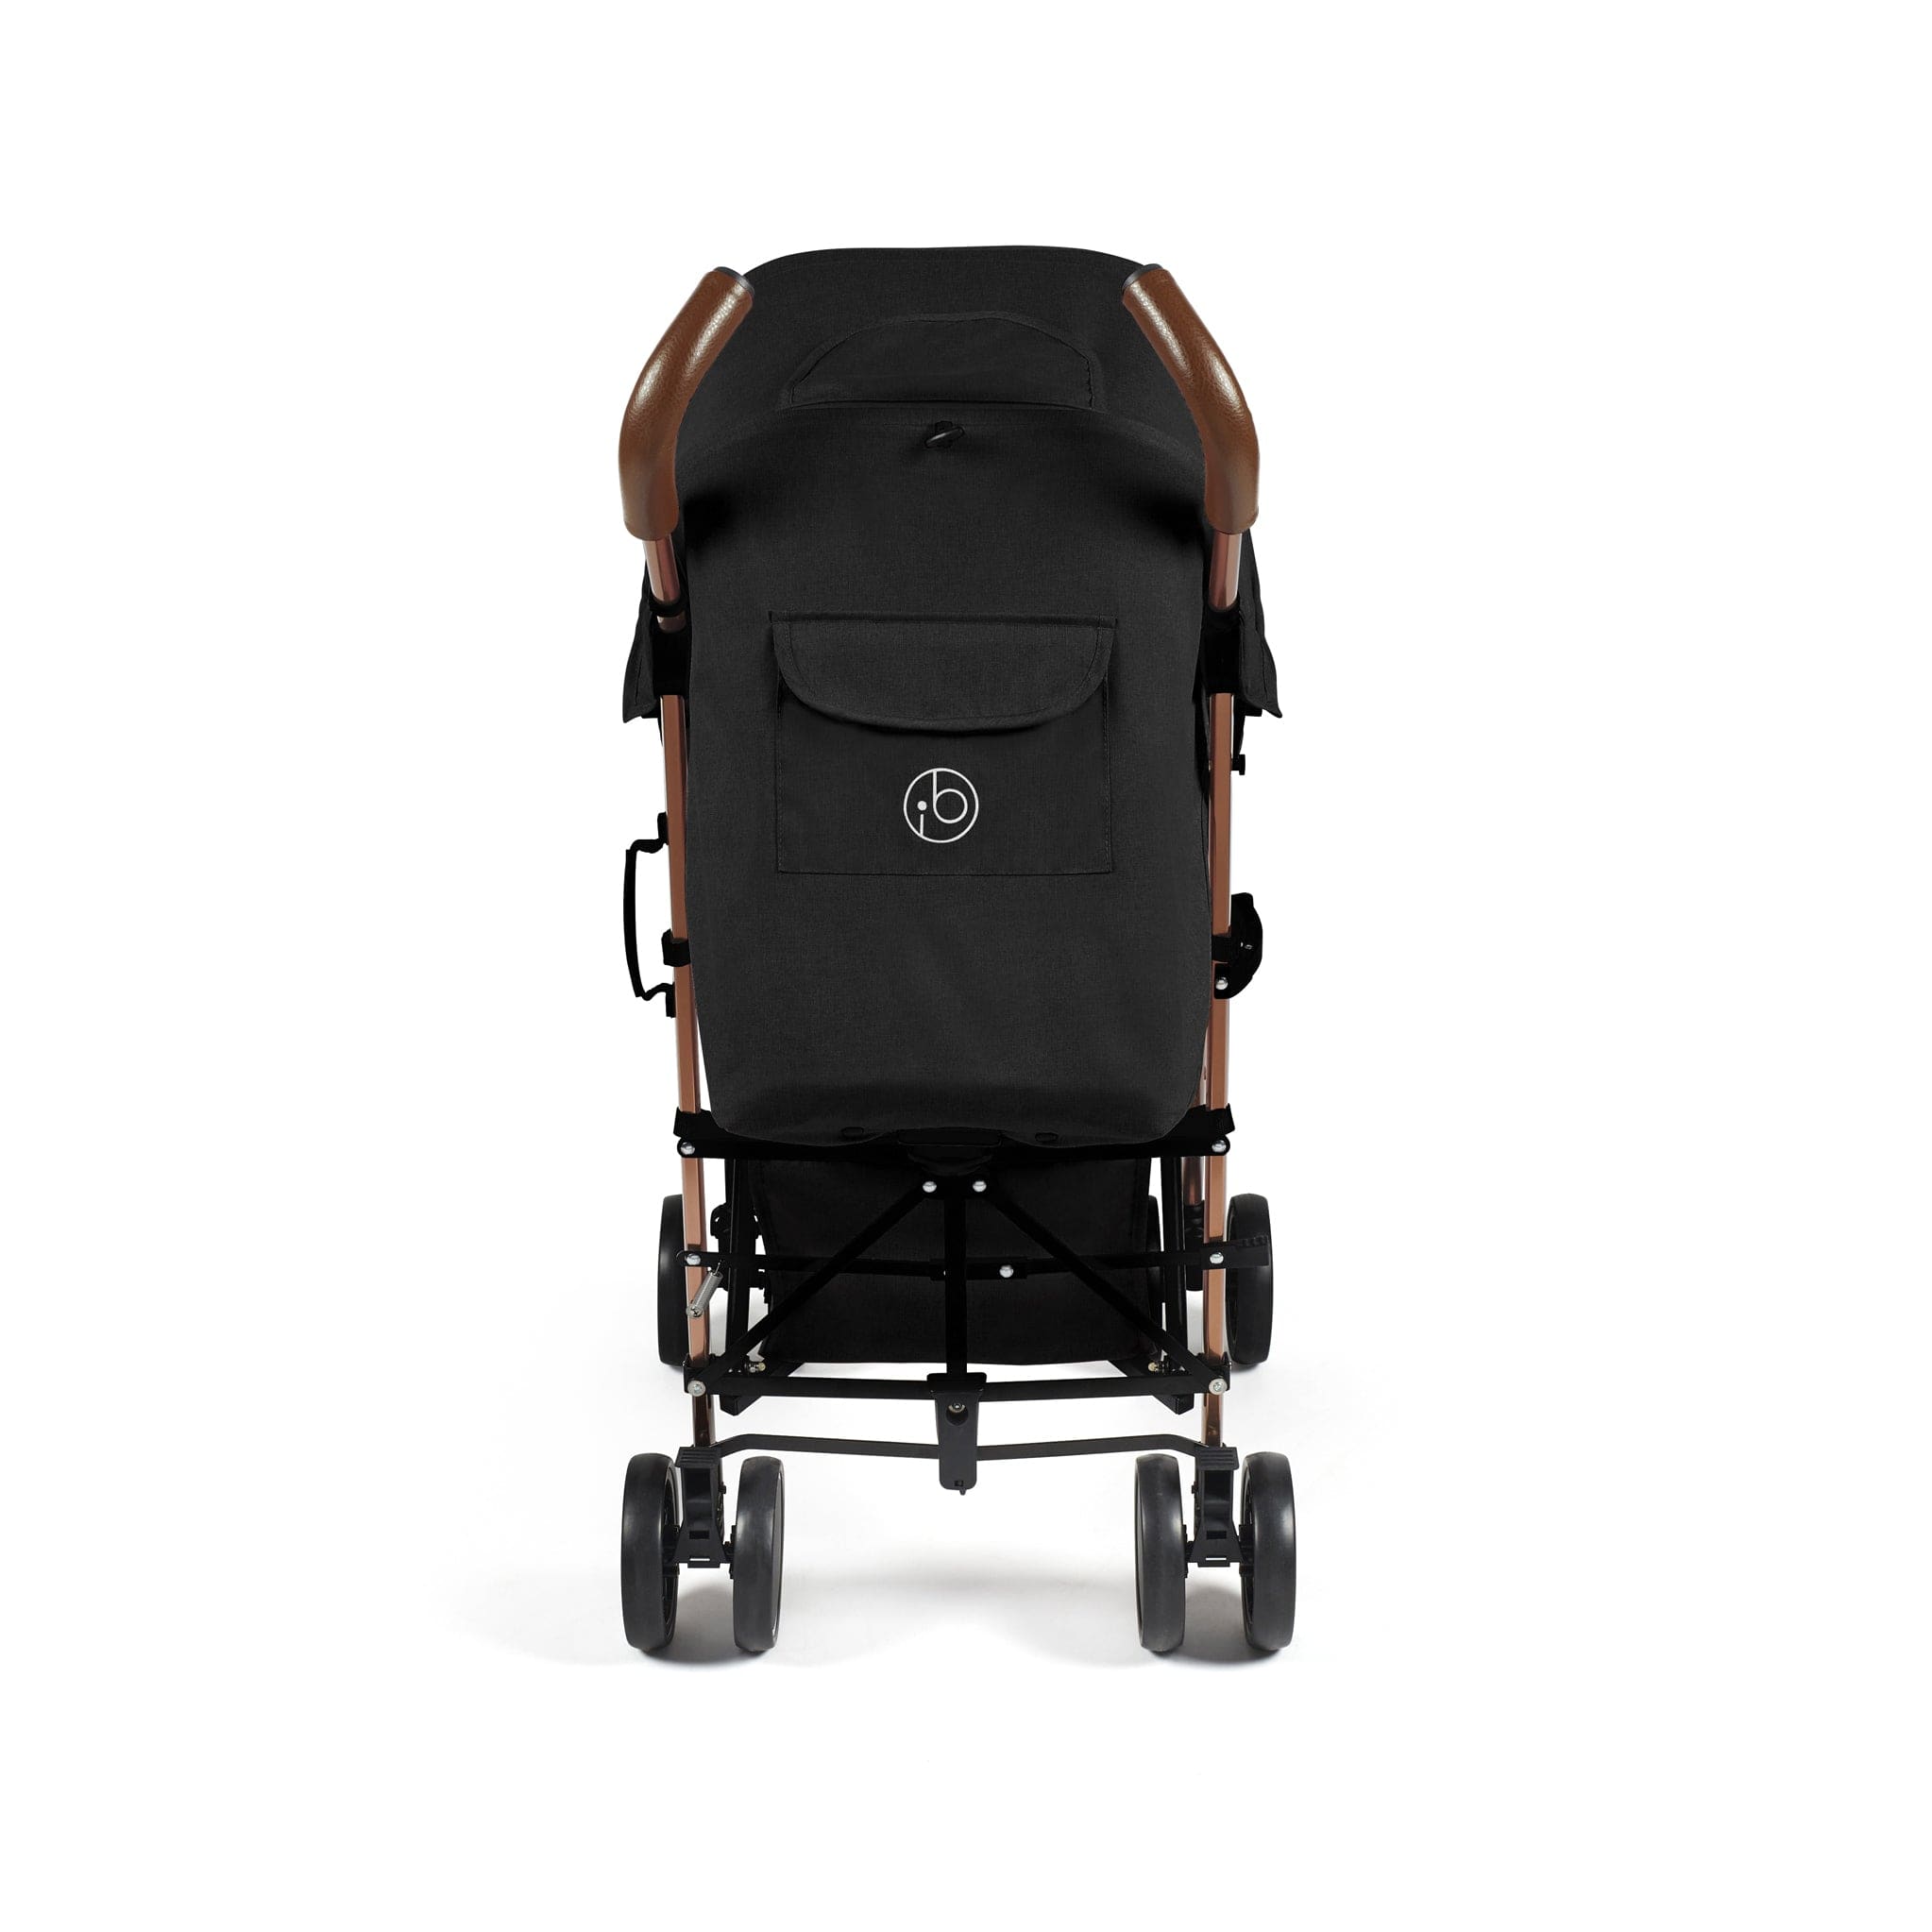 Ickle Bubba baby pushchairs Ickle Bubba Discovery Pushchair Rose Gold/Black 15-002-100-043